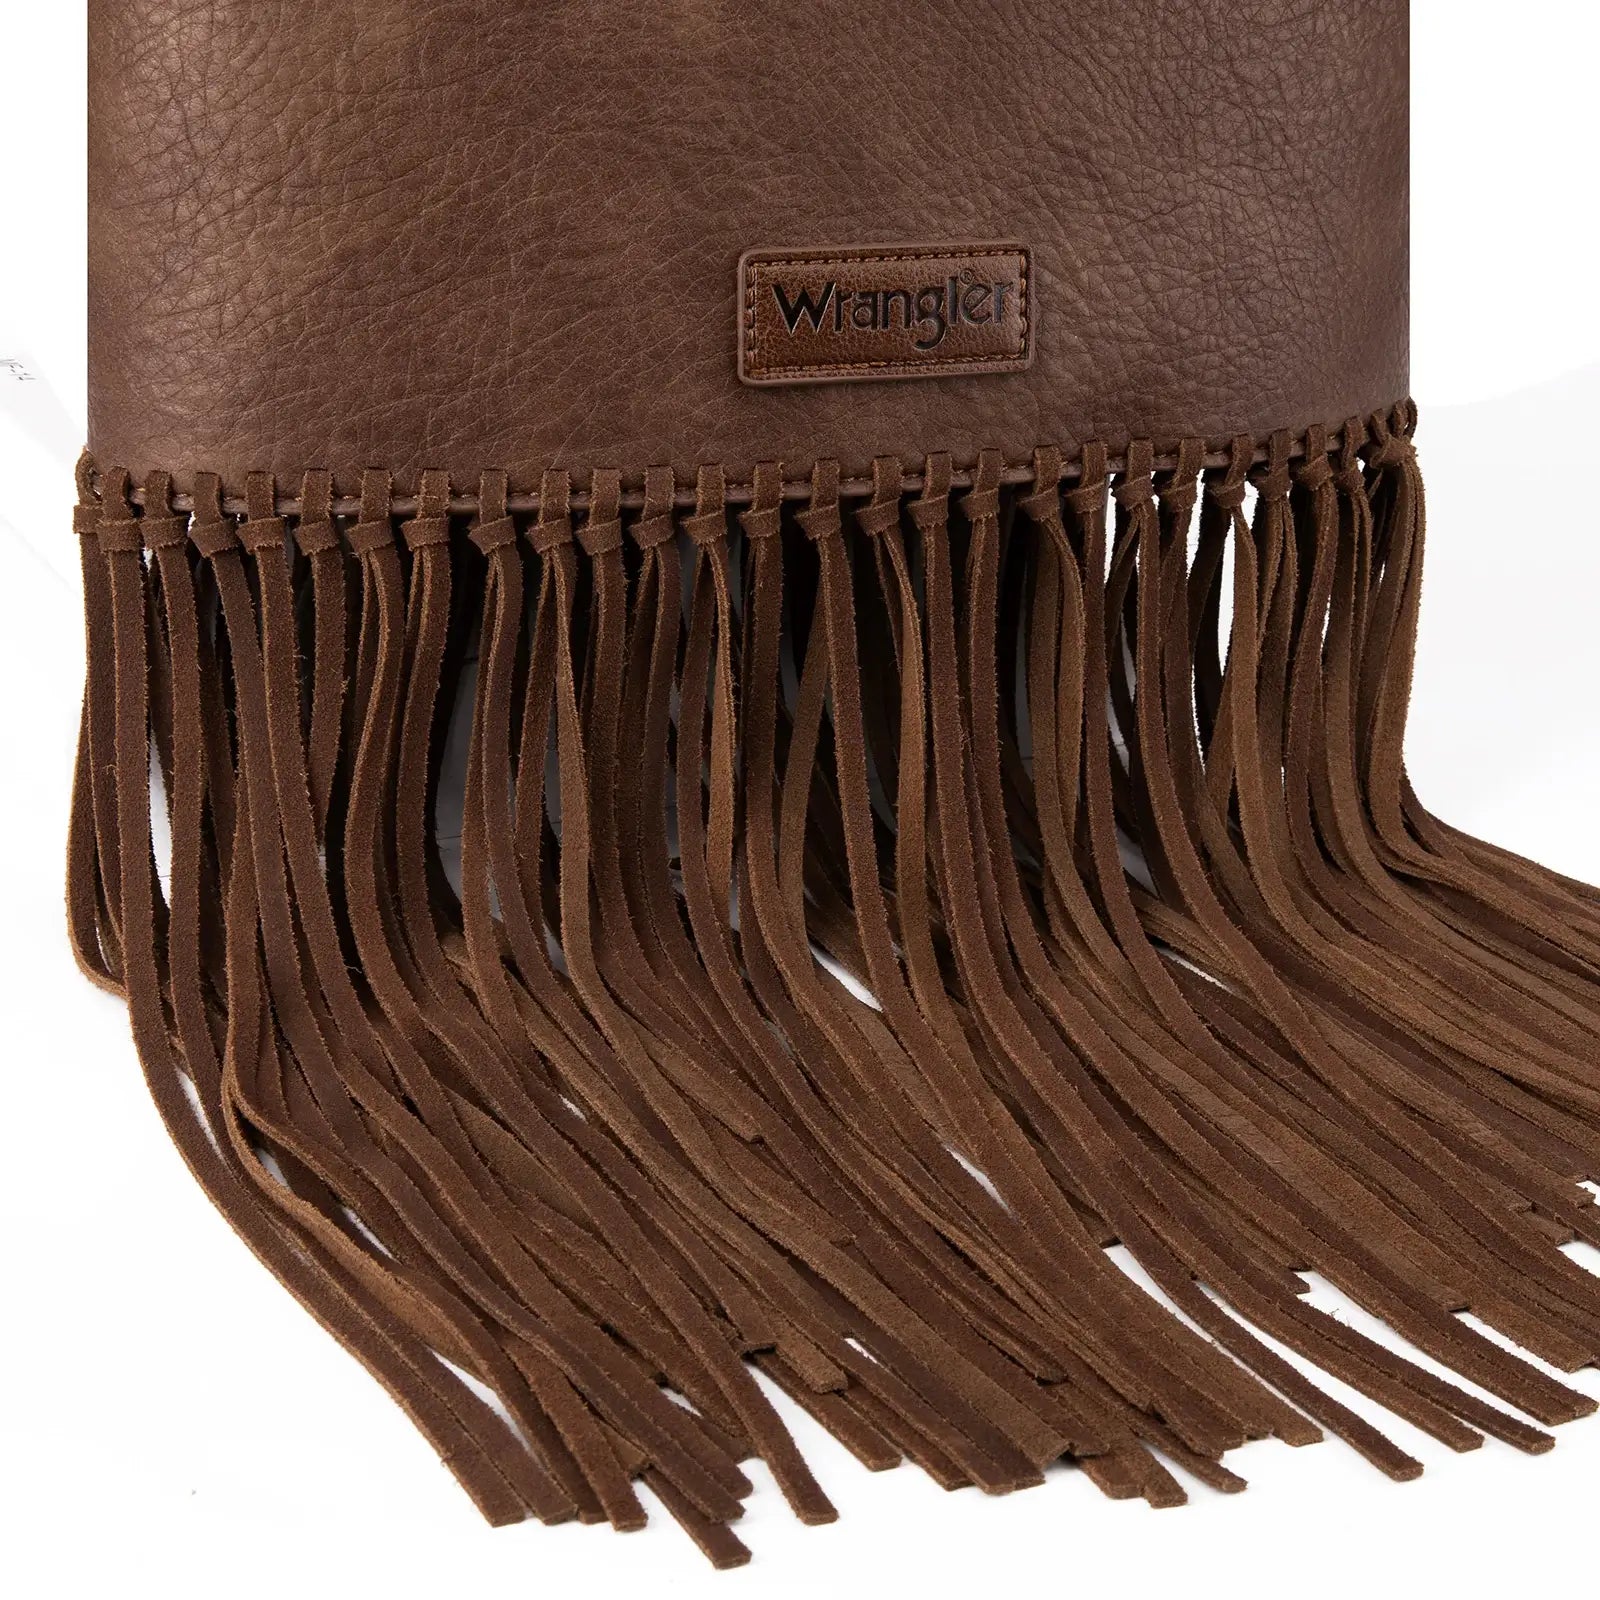 South End Clothing and Apparel L.L.C - Wrangler Turquoise Stone Concho Fringe Hobo -Coffee